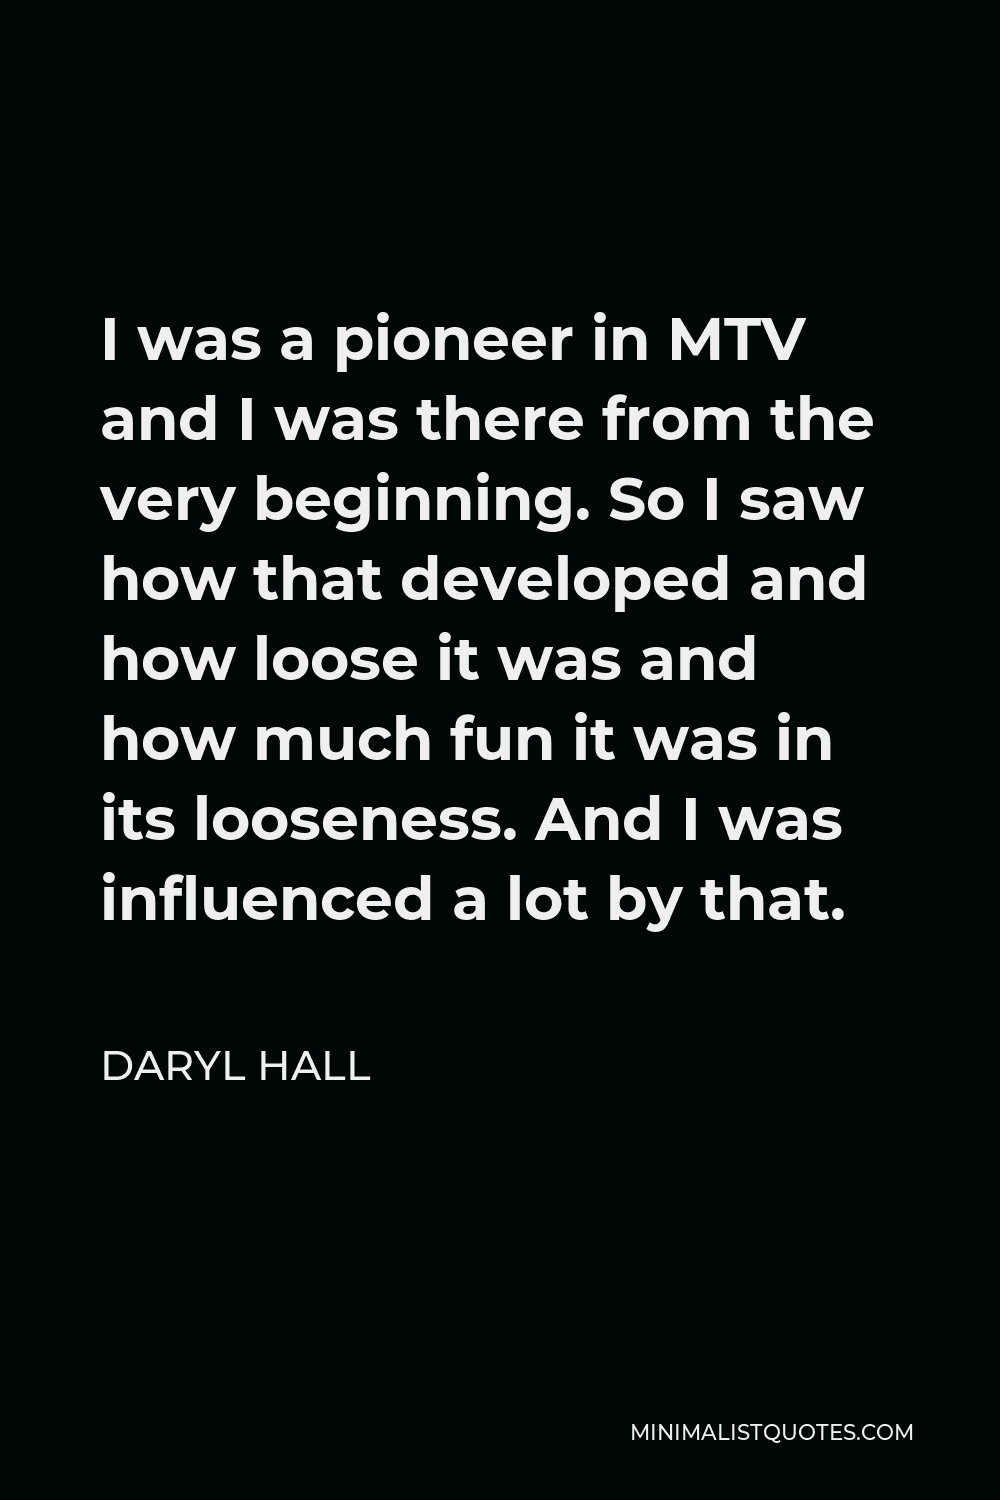 Daryl Hall Quote - I was a pioneer in MTV and I was there from the very beginning. So I saw how that developed and how loose it was and how much fun it was in its looseness. And I was influenced a lot by that.